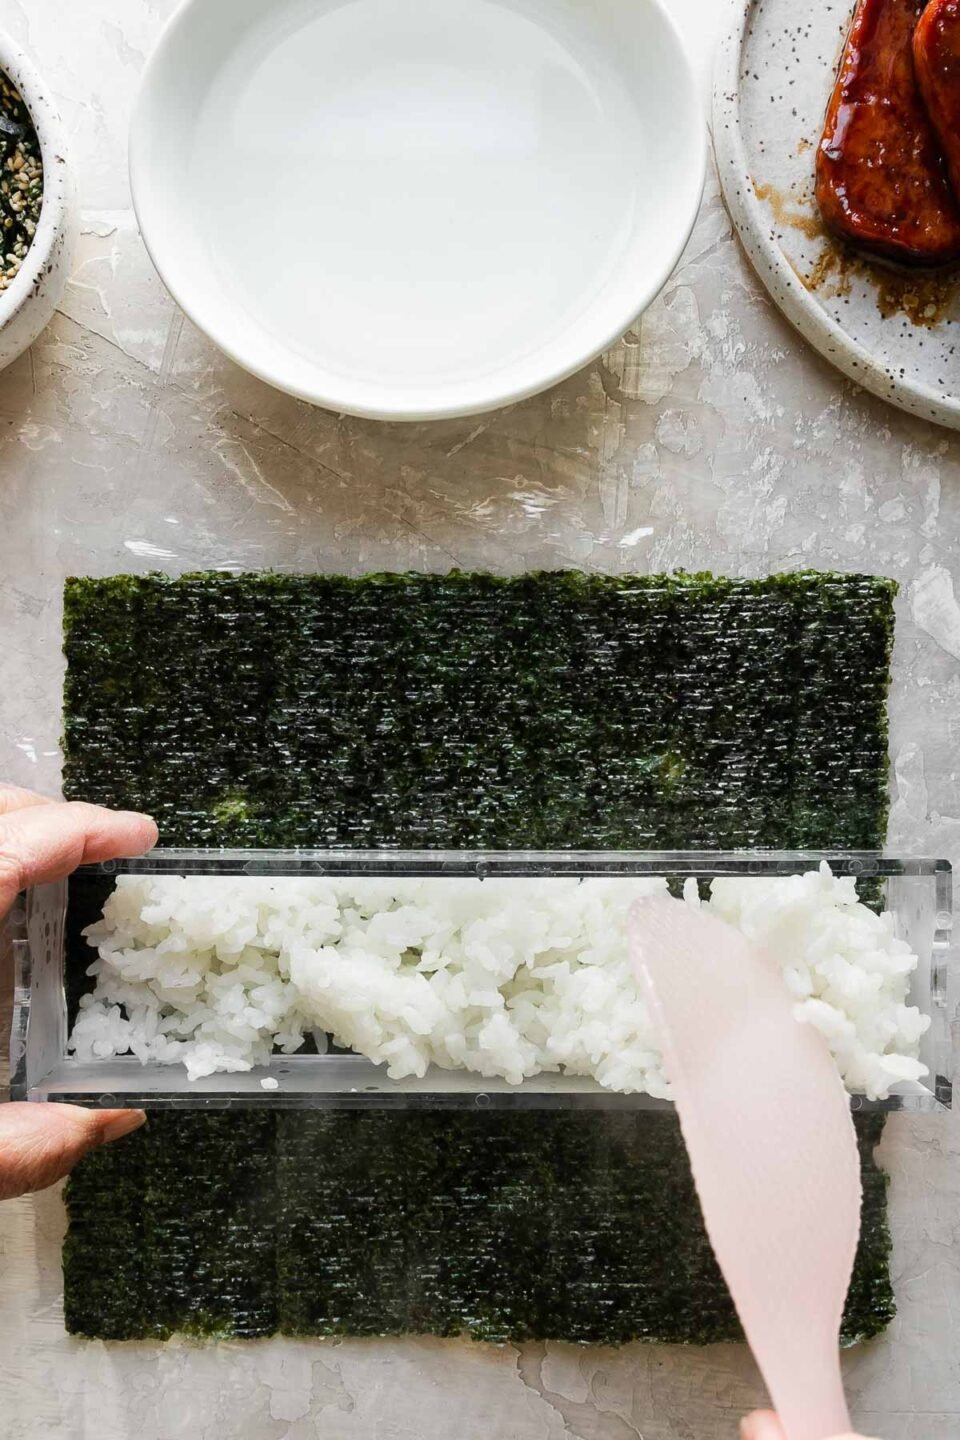 A close up of a woman's hands work to fill the outer box of a double musubi mold that rests atop a single sheet of sushi nori arranged on a piece of plastic wrap atop a creamy white textured surface. The woman stablizes the musubi mold with one hand while she uses a rice paddle in the other to gently add a layer of cooked rice to the inside of the mold. Resting above the nori & the musubi mold is a small bowl filled with furikake seasoning with a spoon resting inside, another small white bowl filled with water, and a small speckled ceramic plate with pan-fried teriyaki Spam.